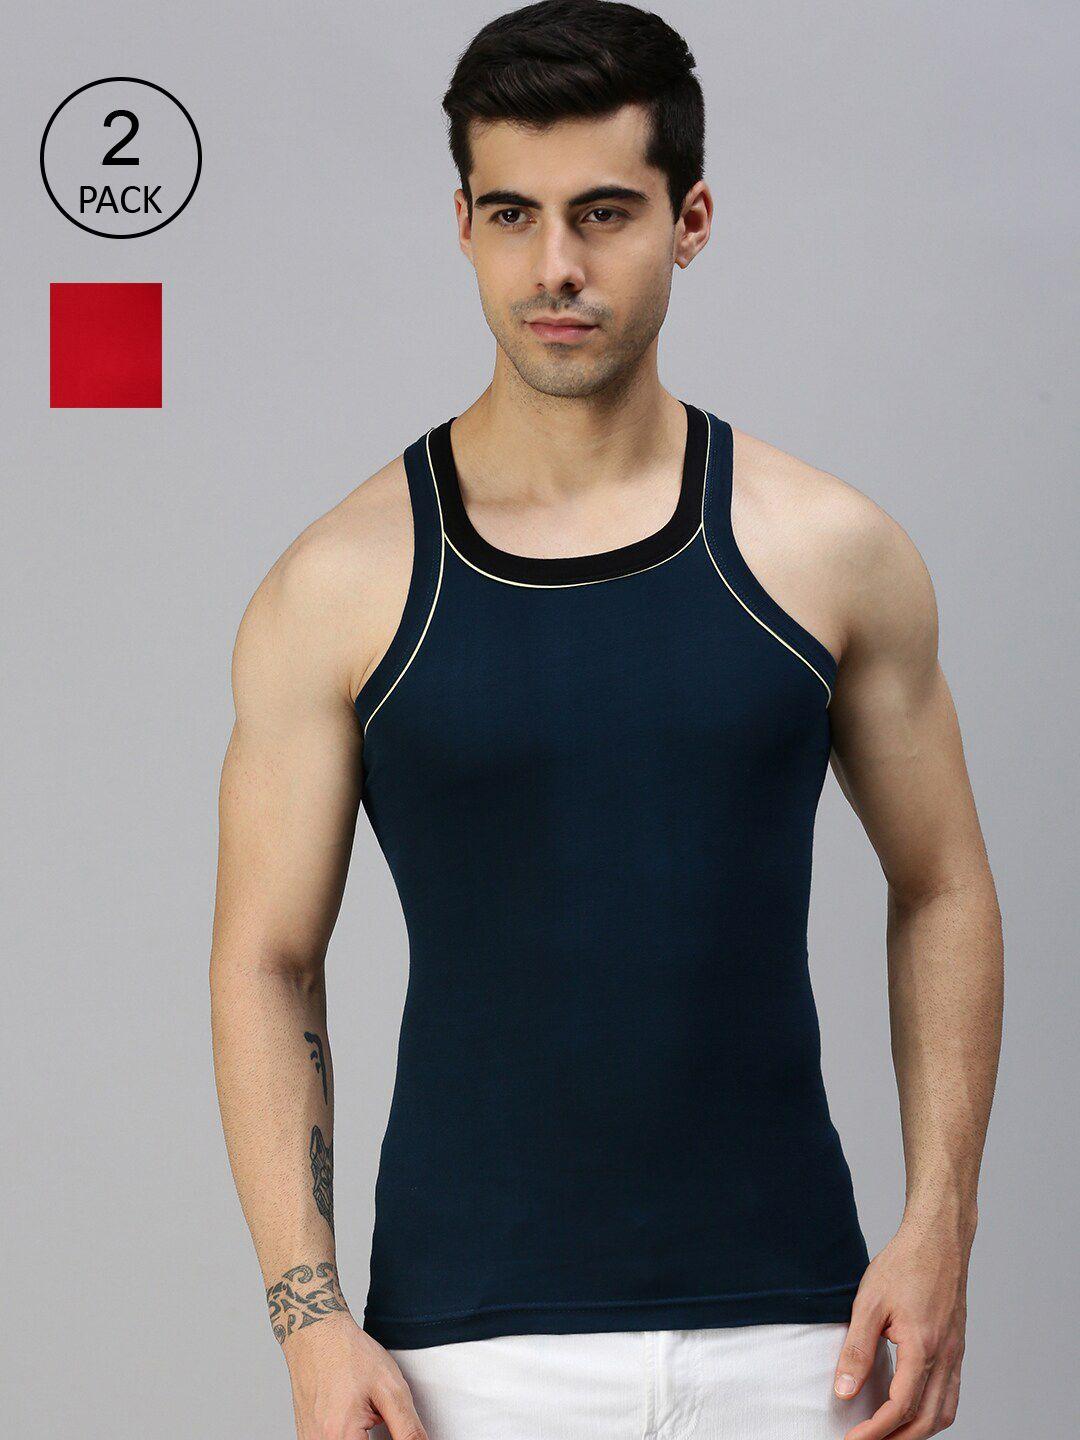 lux-cozi-men-pack-of-2-solid-organic-cotton-innerwear-vests